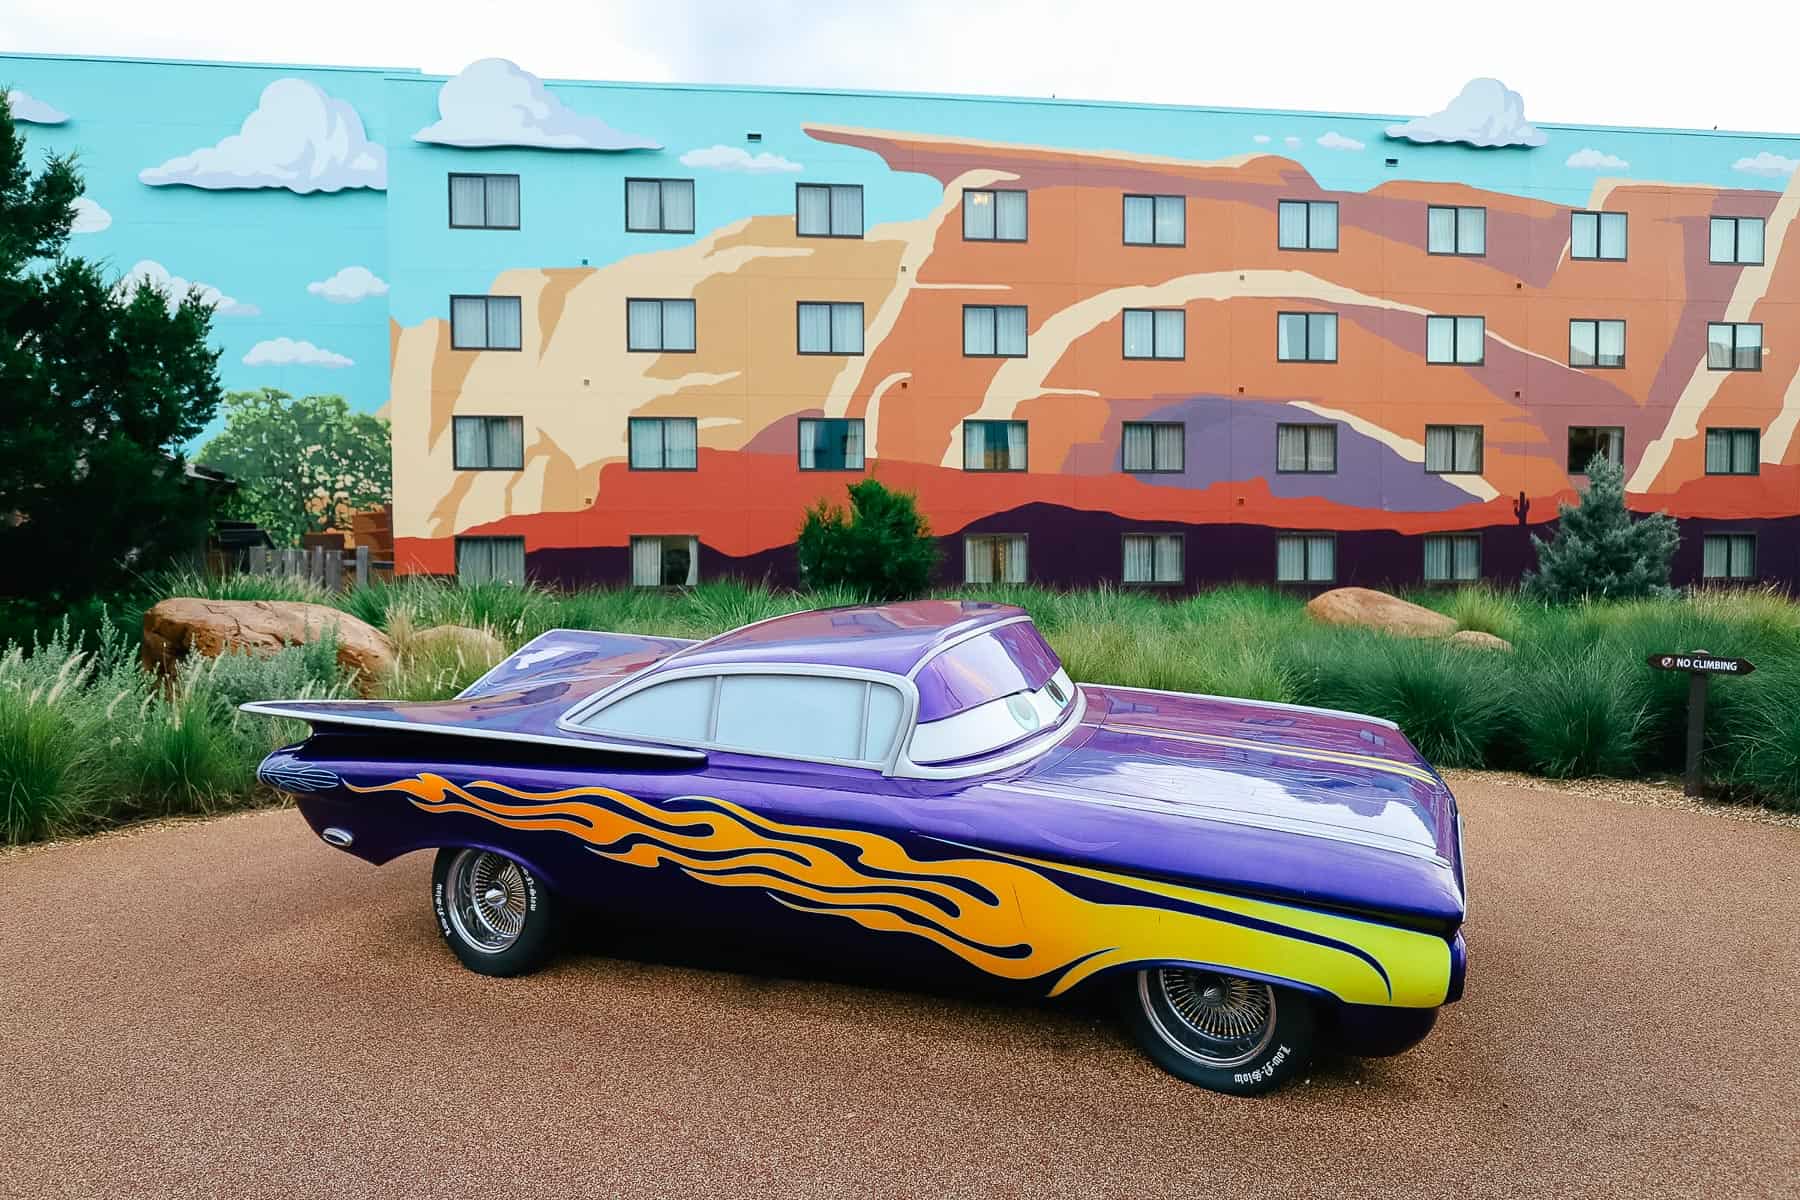 Cars section of Disney's Art of Animation family suites